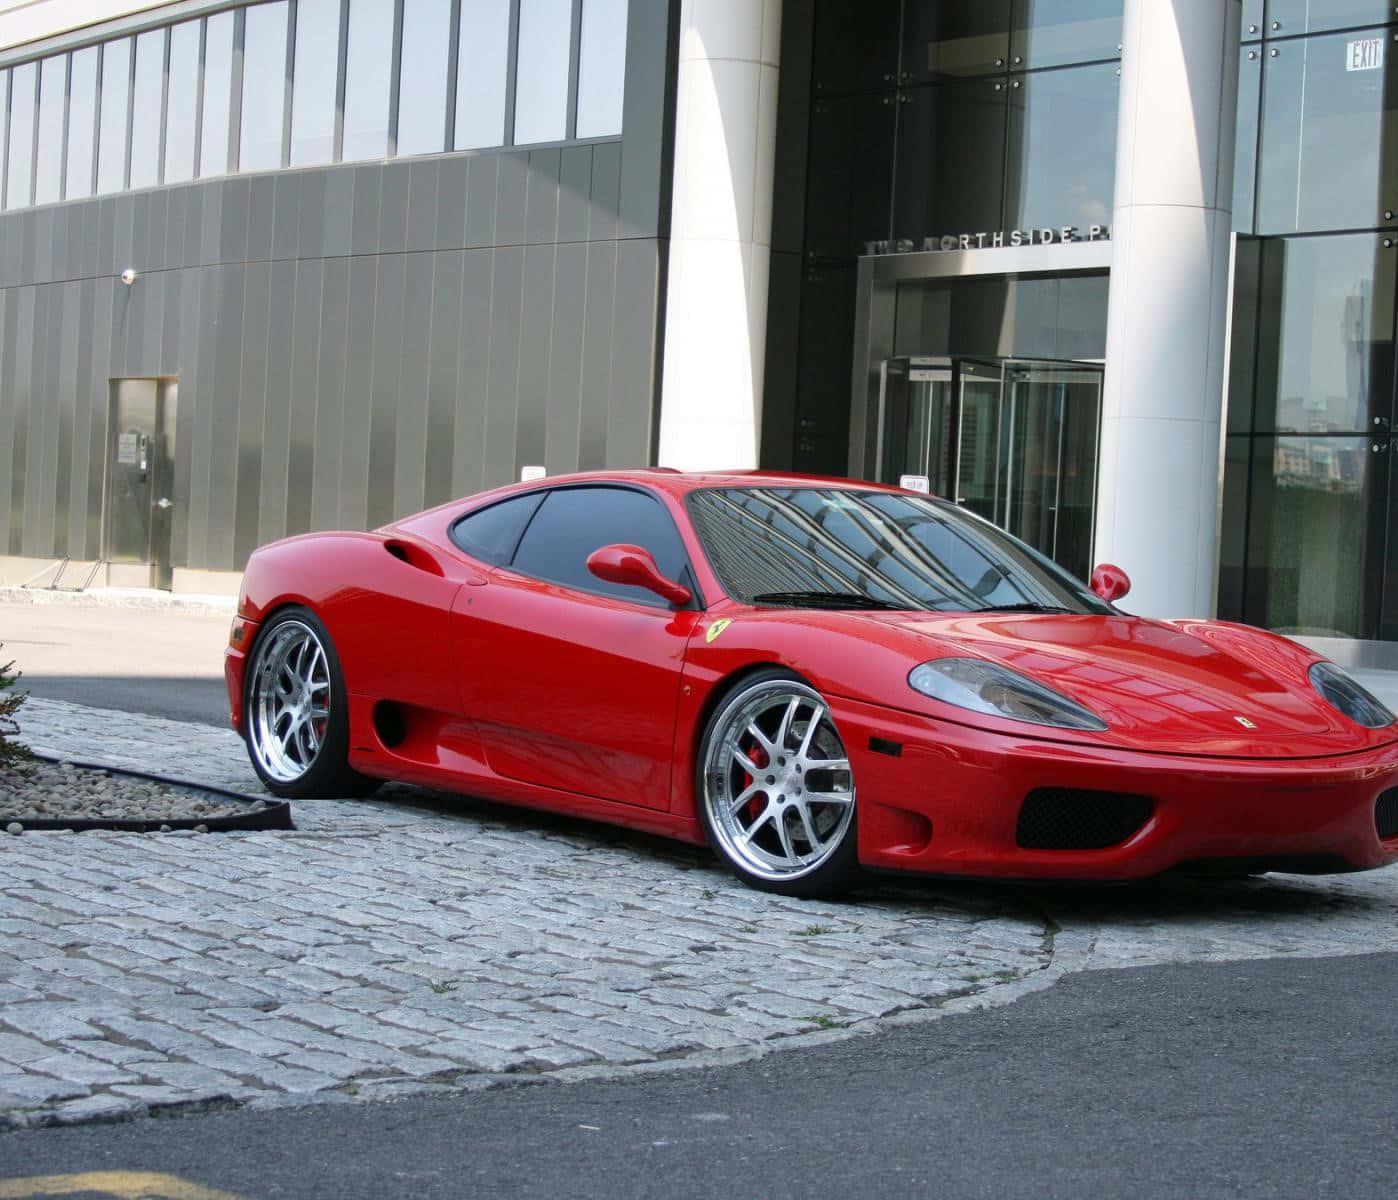 Stunning Red Ferrari 360 Modena, Parked and Ready for Adventure Wallpaper